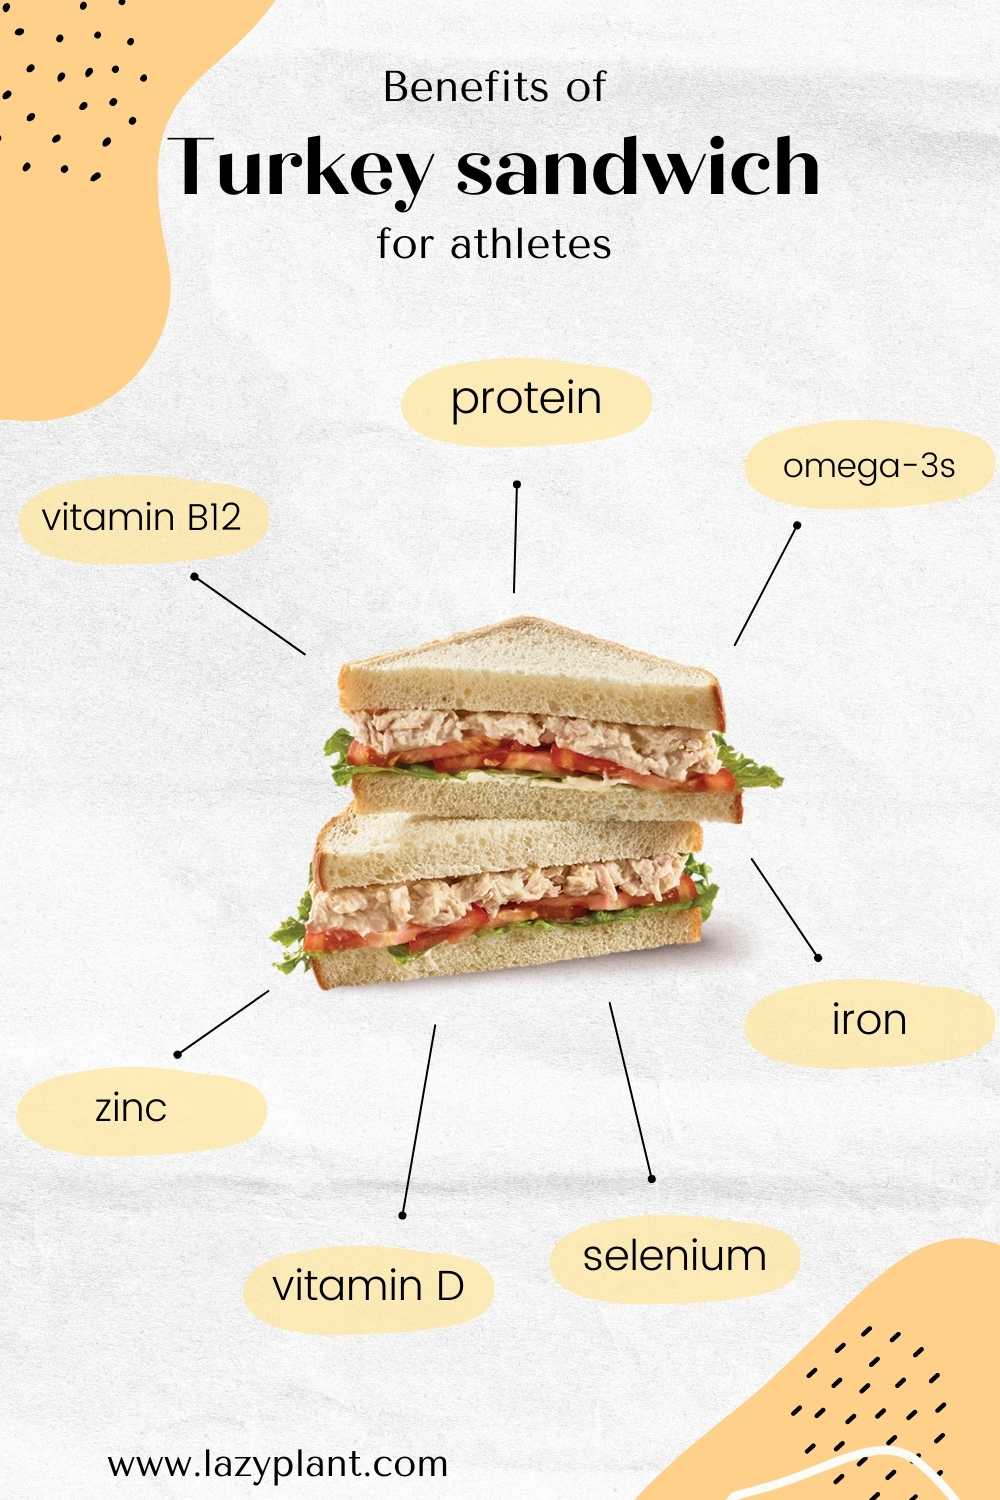 Why should athletes eat a tuna sandwich after exercise?